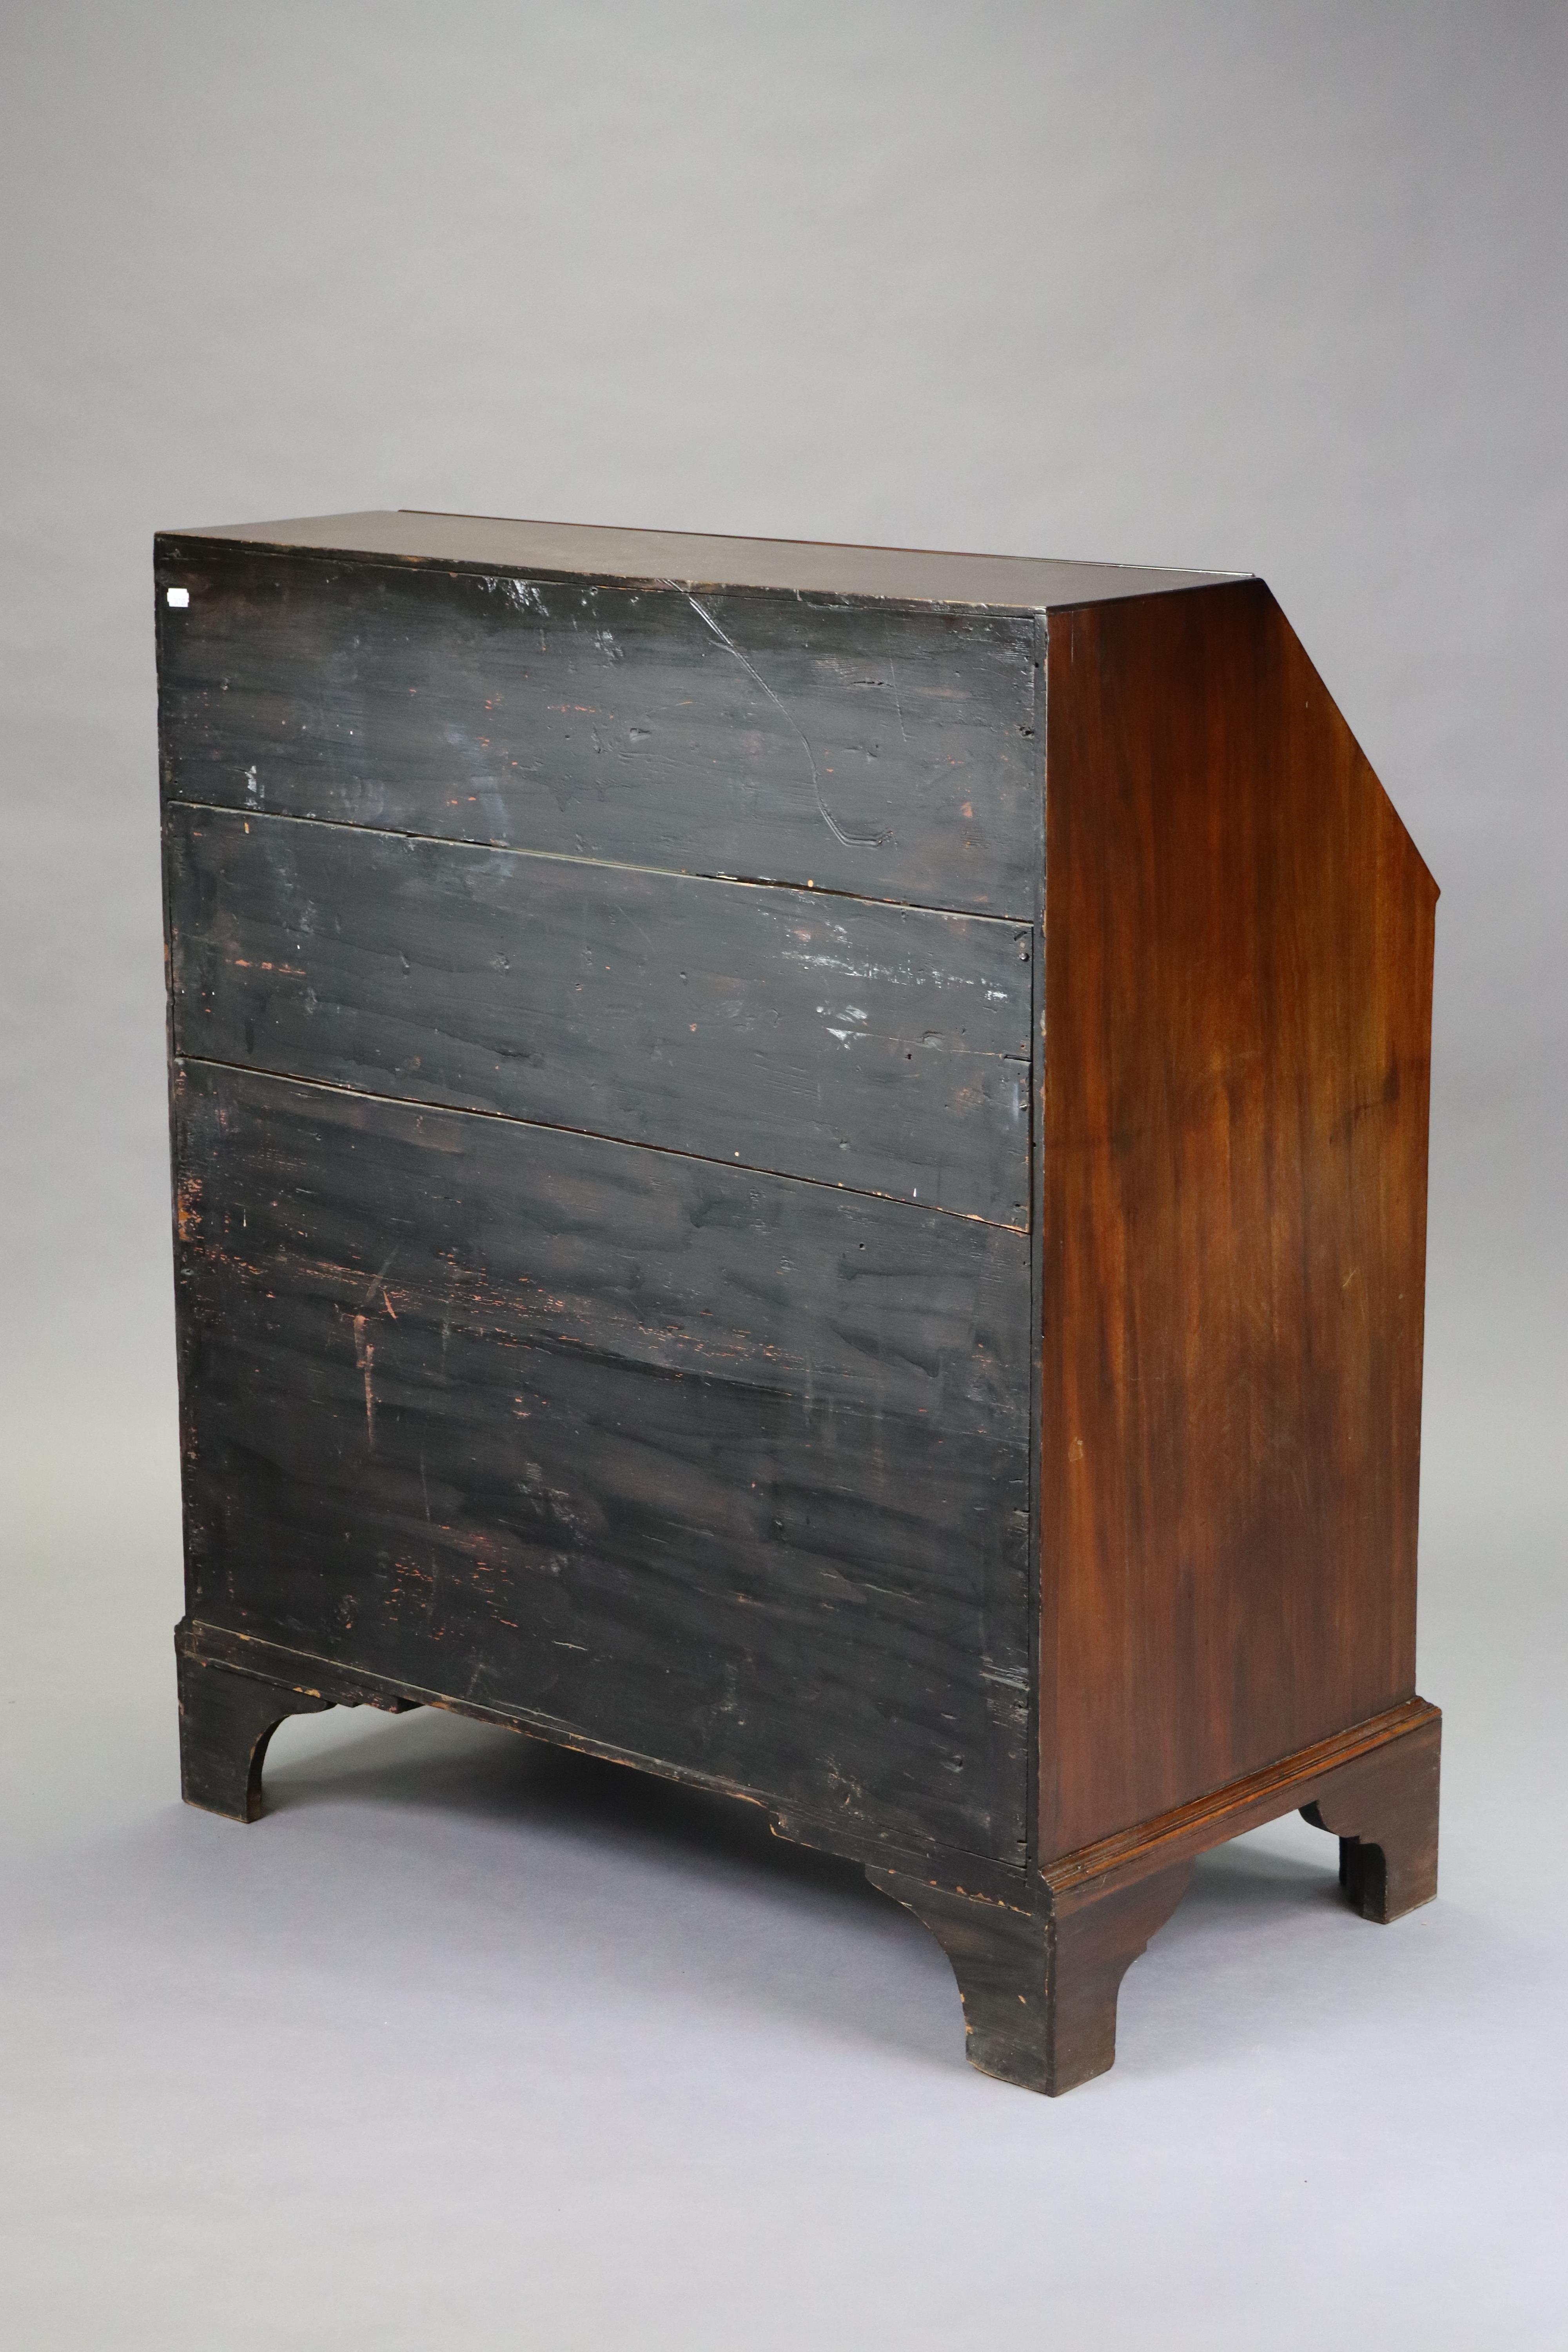 An 18th century mahogany bureau with fitted interior and gilt-tooled leather writing surface - Image 3 of 3